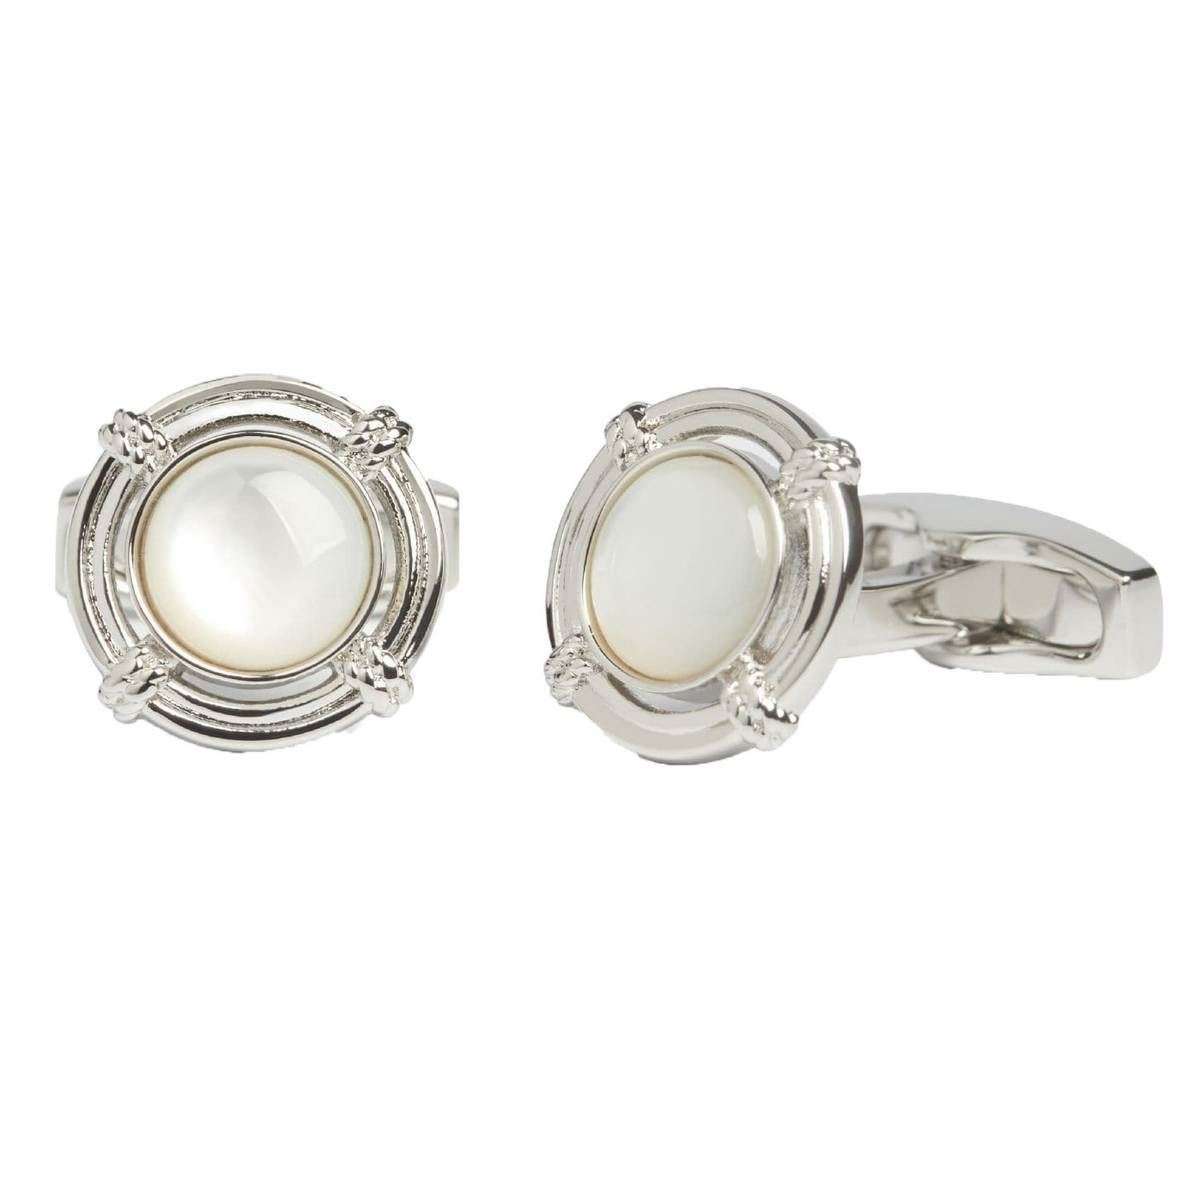 Simon Carter Mother of Pearl Life Buoy Cufflinks - Silver/White